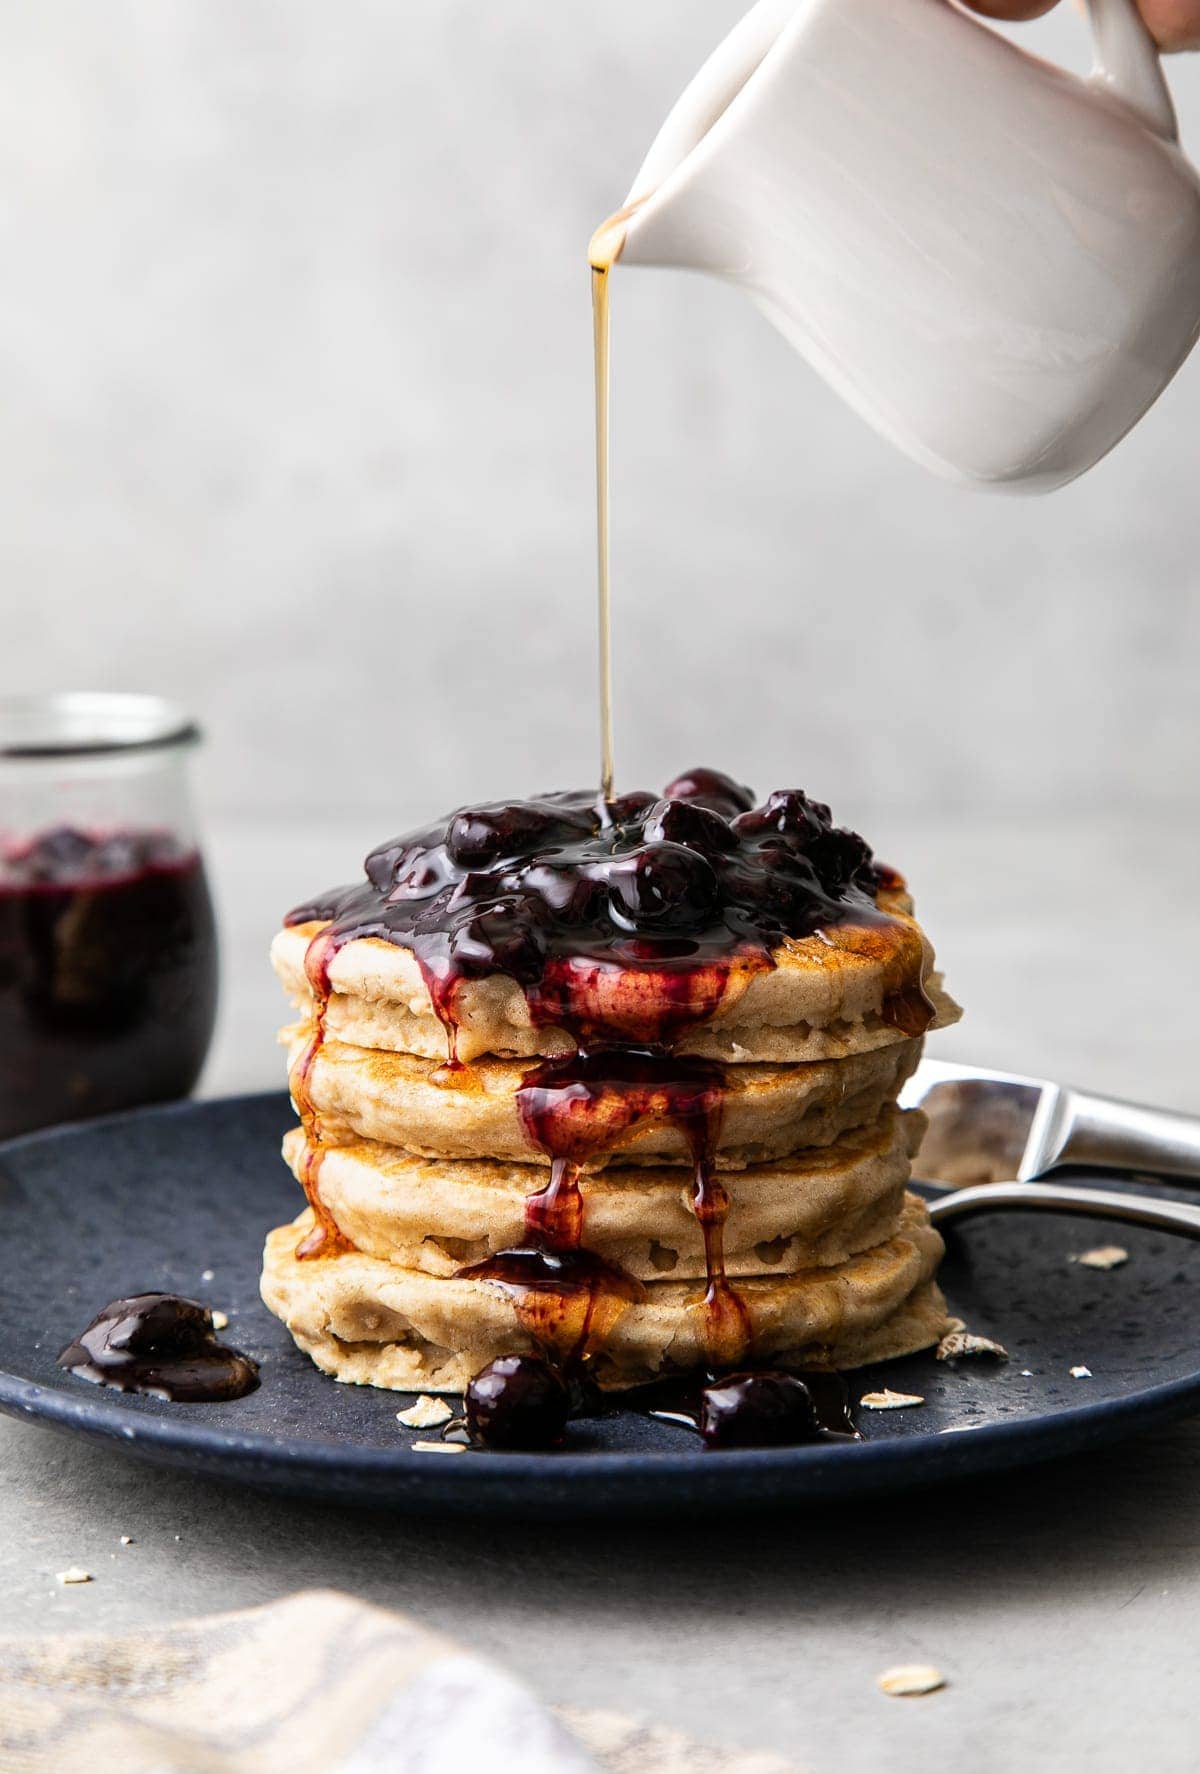 head on view of stacked pancakes with blueberry compote and being drizzled with syrup.